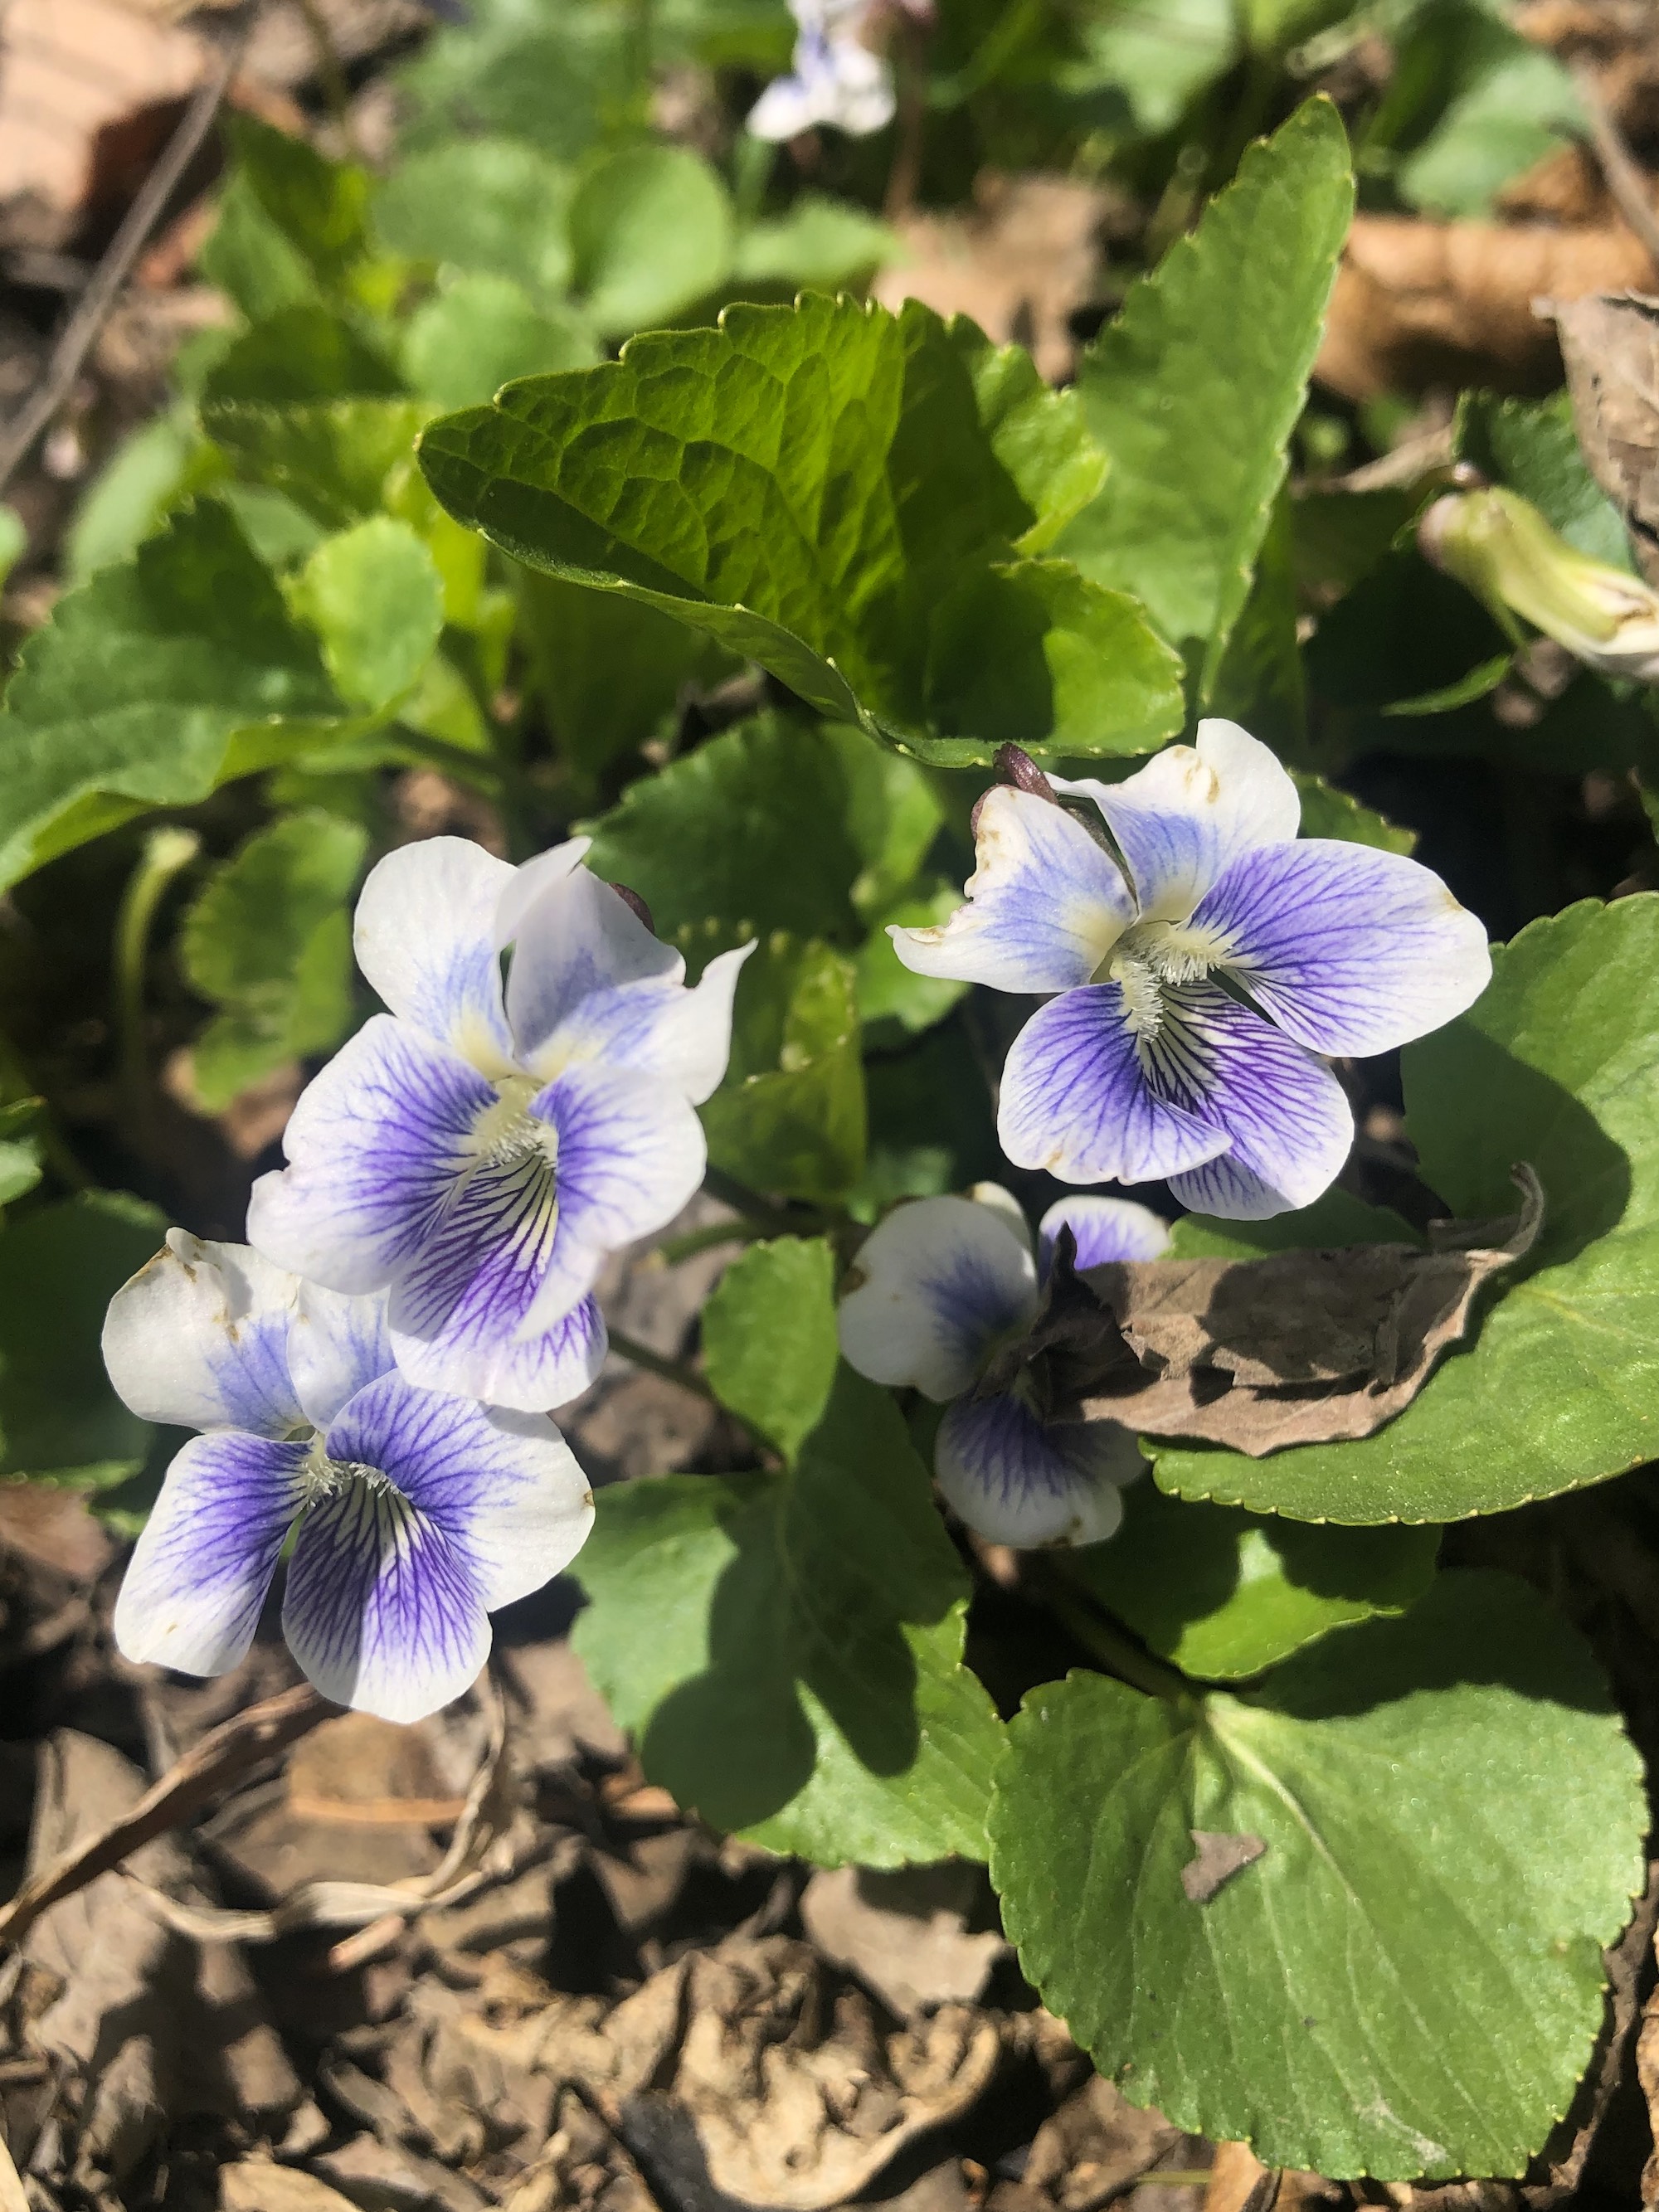 Violet in Agawa Path in Madison, Wisconsin on April 17, 2021.